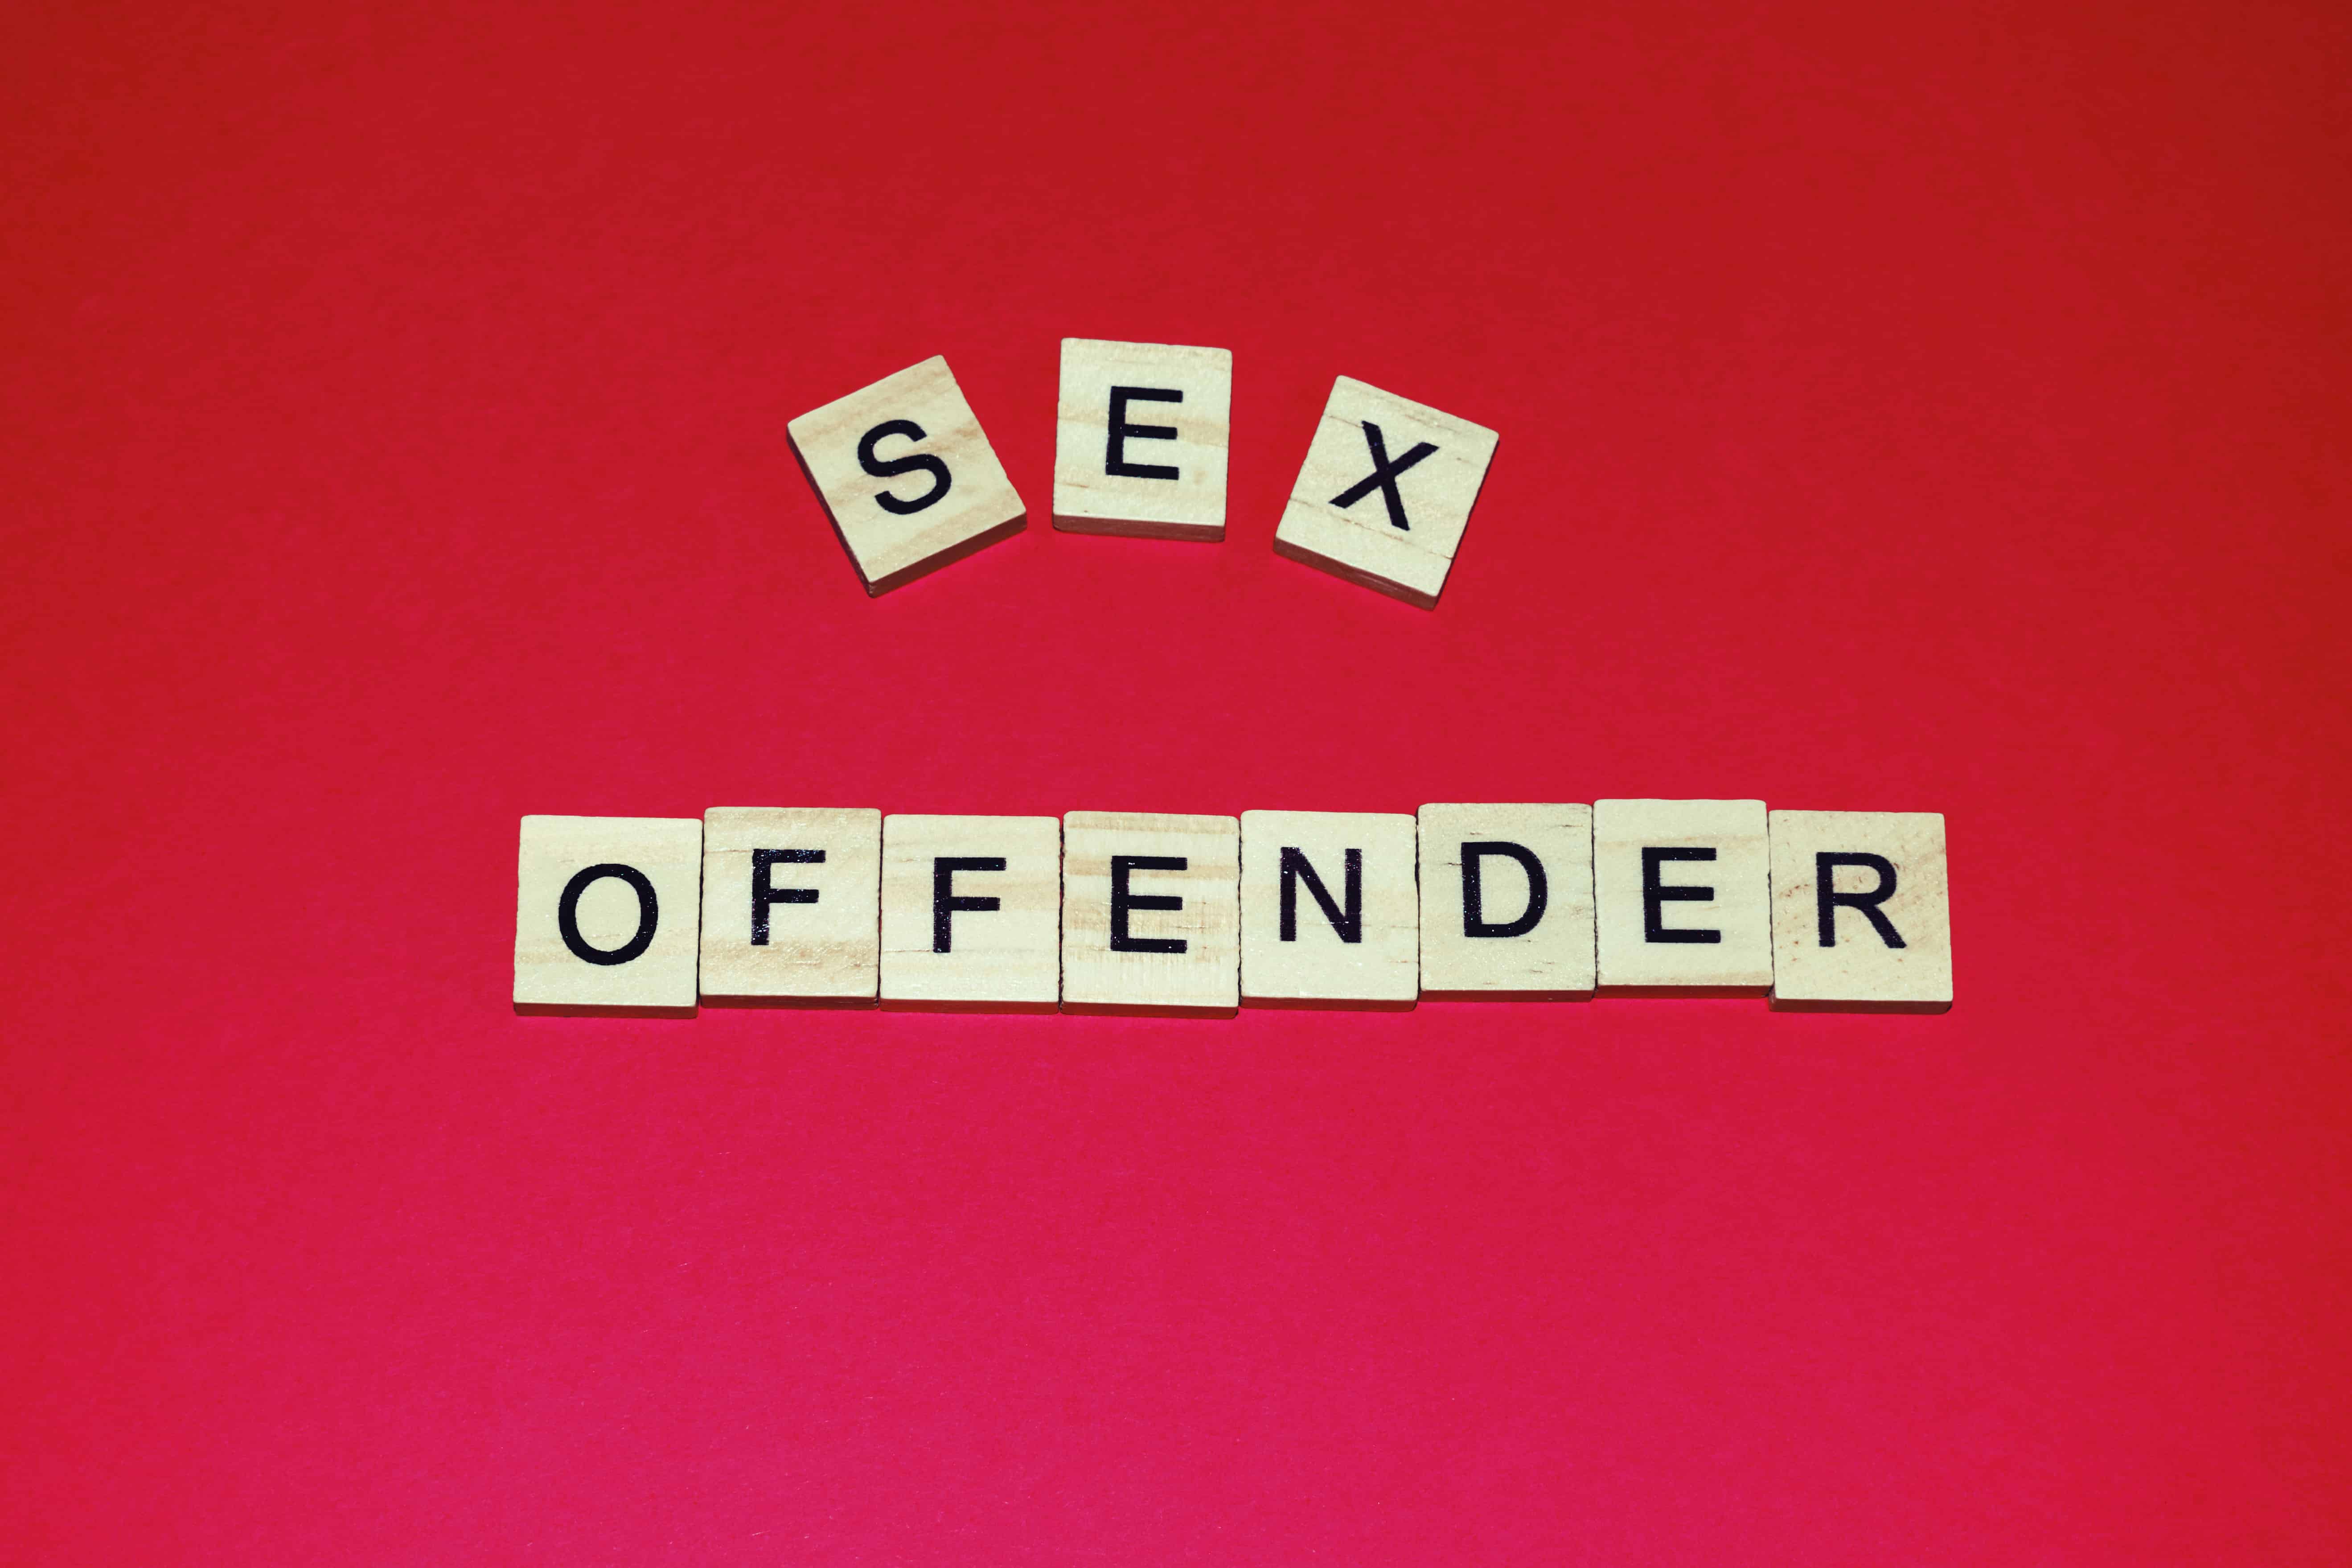 consequences of being a sex offender